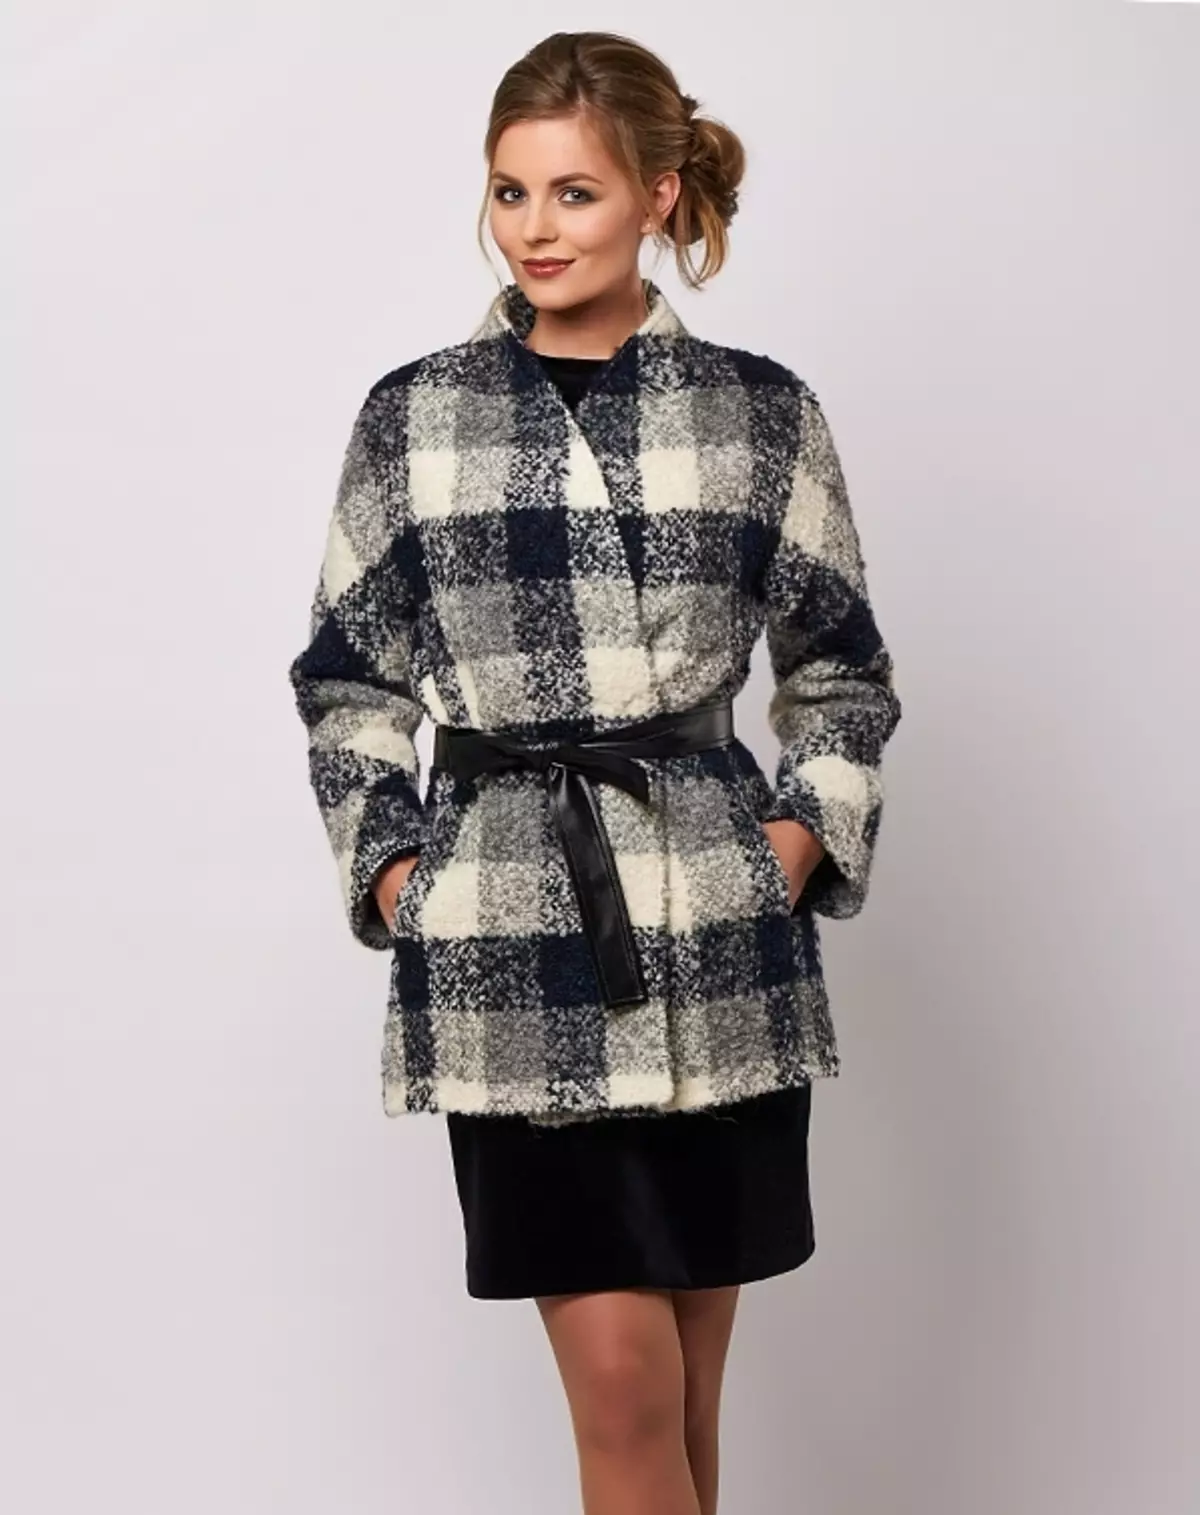 Personne Coat (30 larawan): Female luxury models from person 351_8